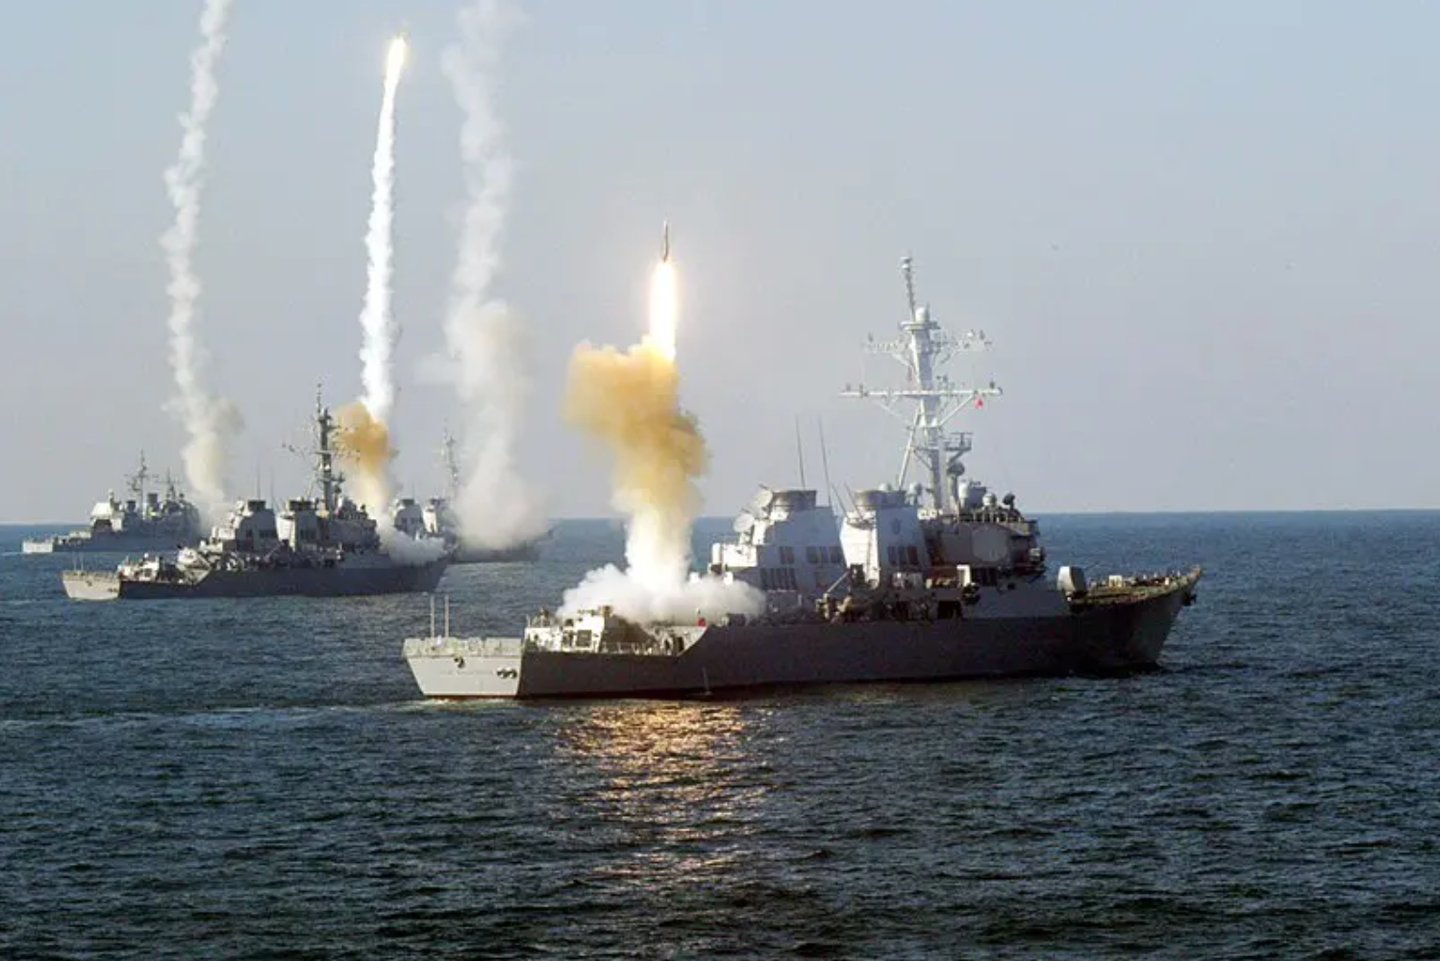 <em>Left to right, the guided missile cruiser USS Vicksburg (CG 69), and the guided missile destroyers USS Roosevelt (DDG 80), USS Carney (DDG 64) and USS The Sullivans (DDG 68) launch a coordinated volley of missiles during a Vandel Exercise (VANDALEX). (US Navy photo)</em>